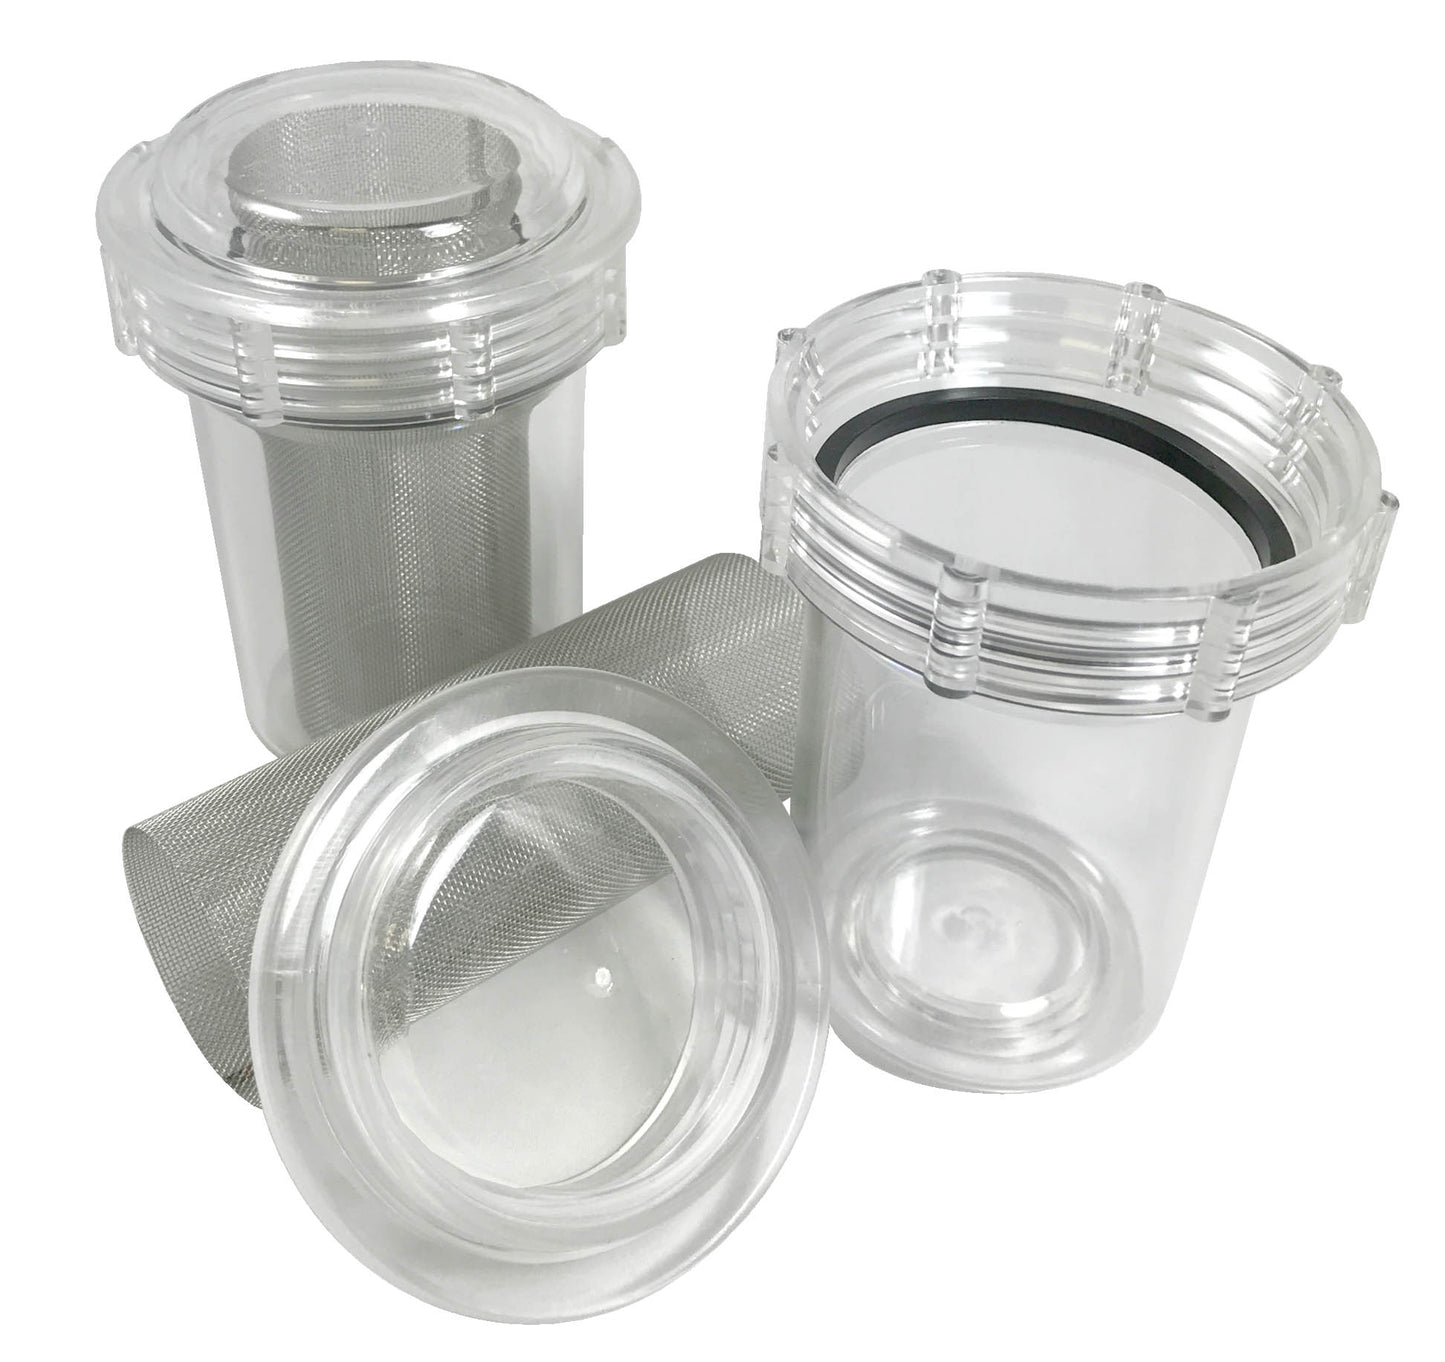 UNiVAQ Canisters